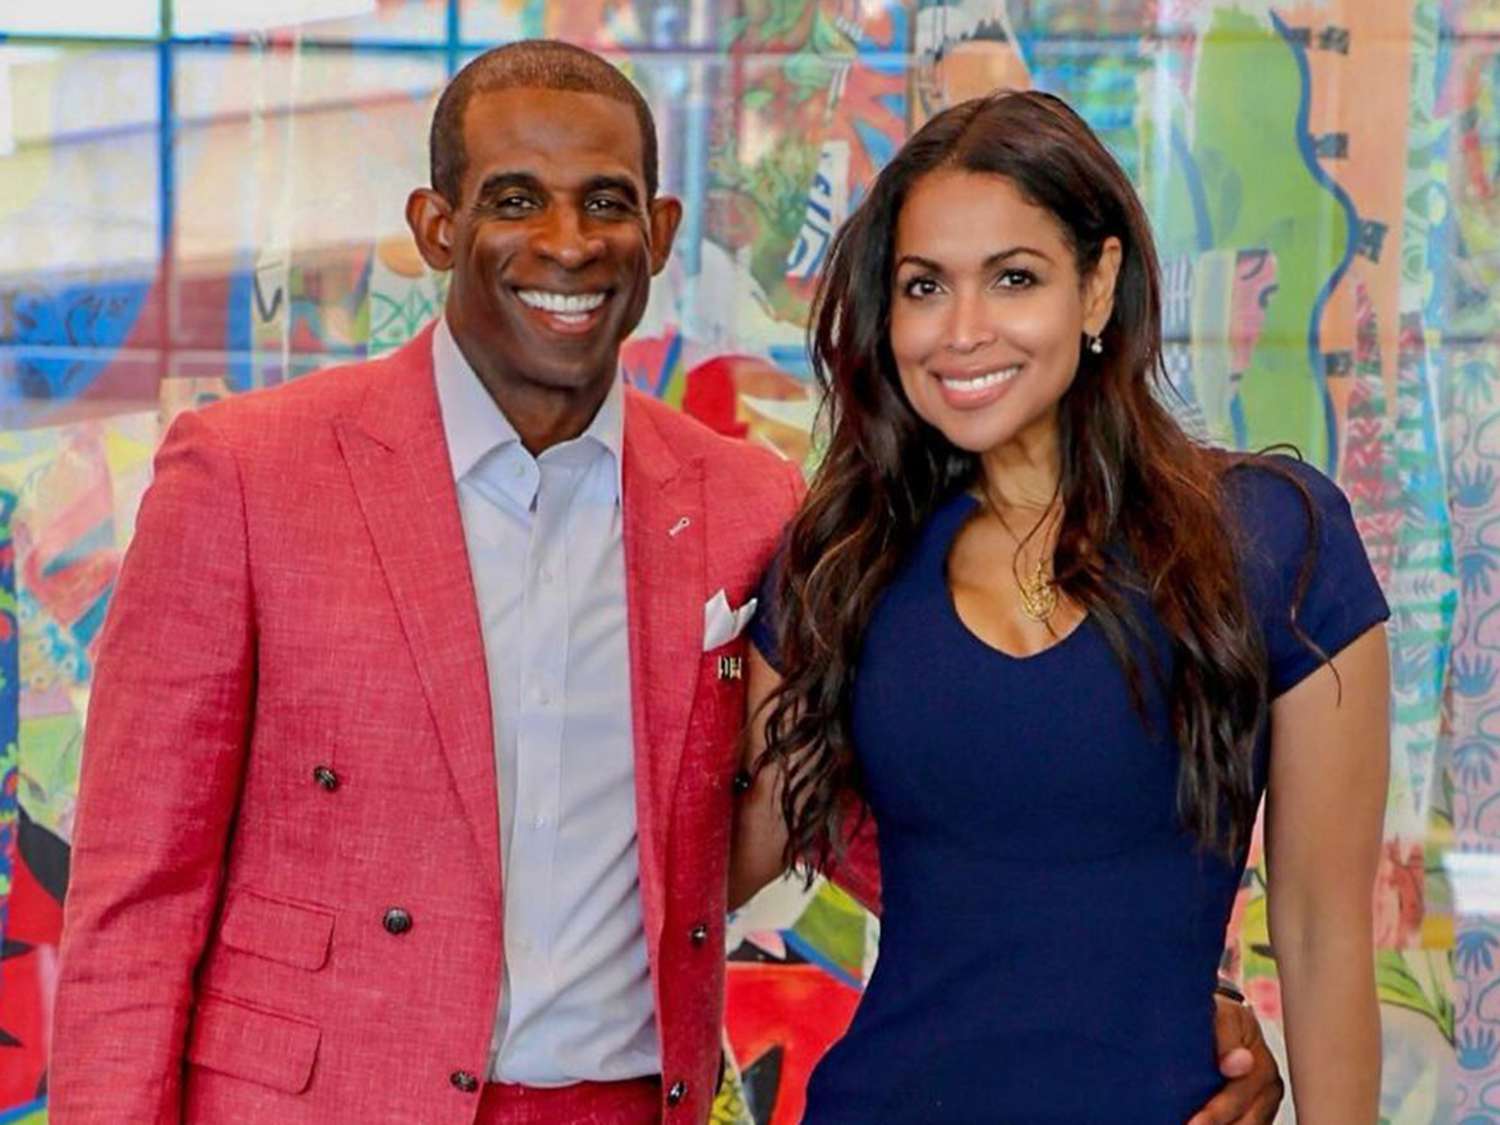 Deion Sanders Ends Relationship With Longtime Girlfriend Tracey Edmonds Amid Difficult Season At Colorado